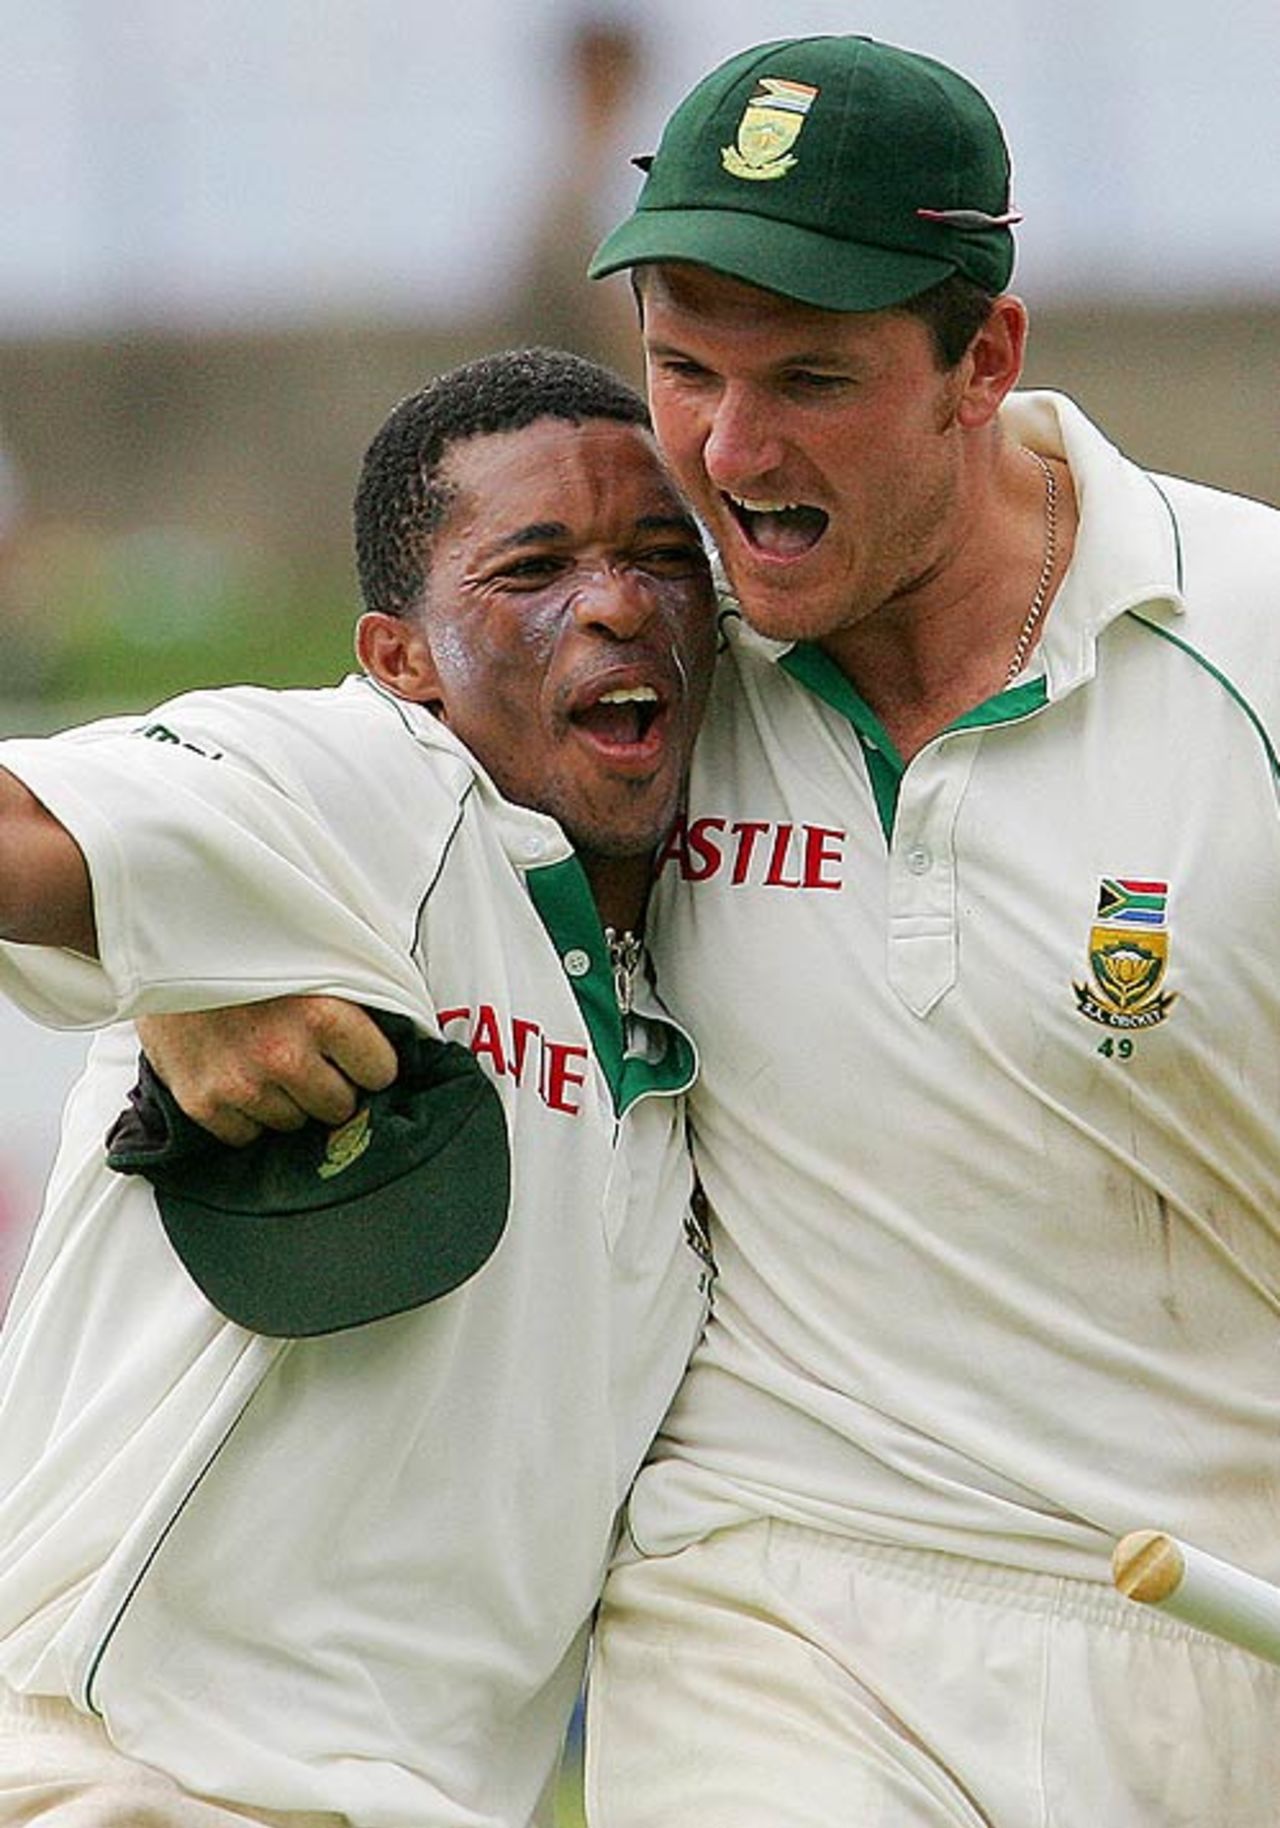 Graeme Smith and Makhaya Ntini are jubilant after a famous win, South Africa v India, 2nd Test, Durban, 5th day, December 30, 2006